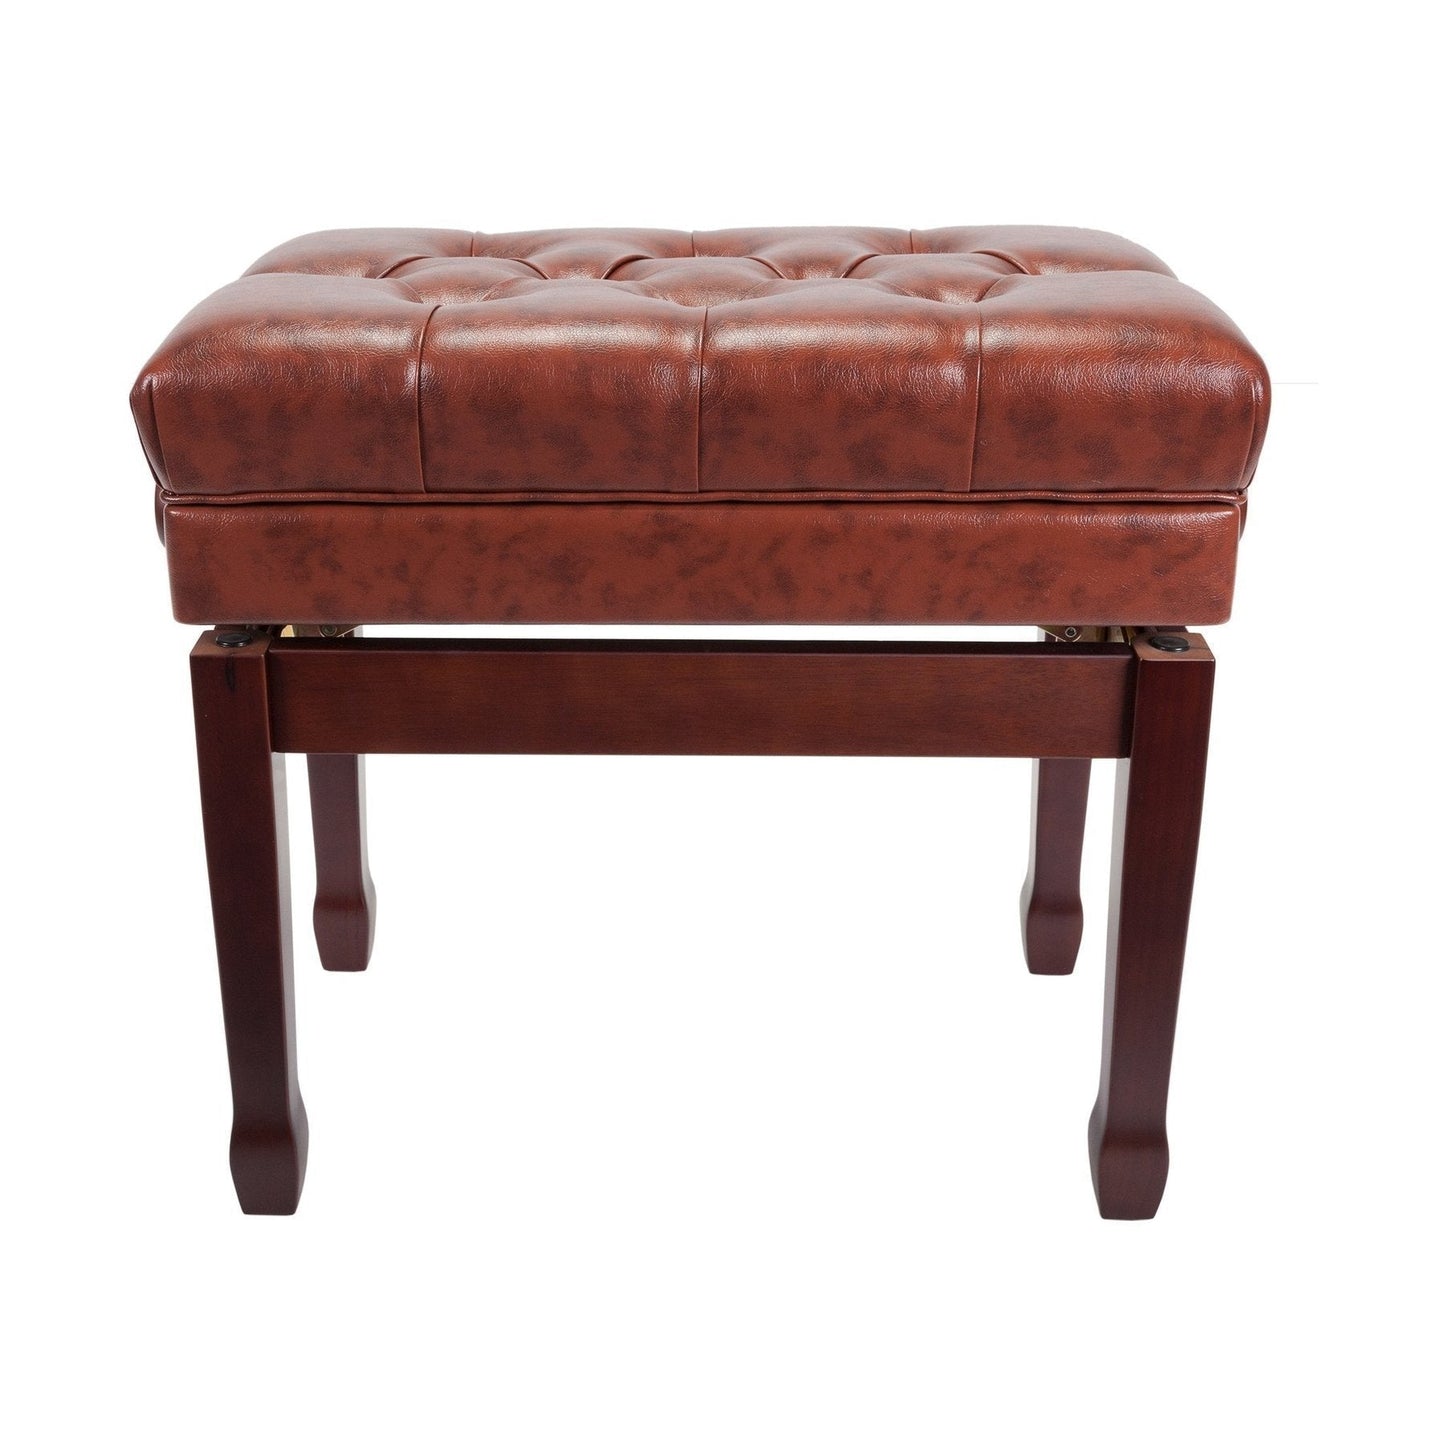 Crown Premium Tufted Double Padded Height Adjustable Piano Stool with Storage Compartment (Walnut)